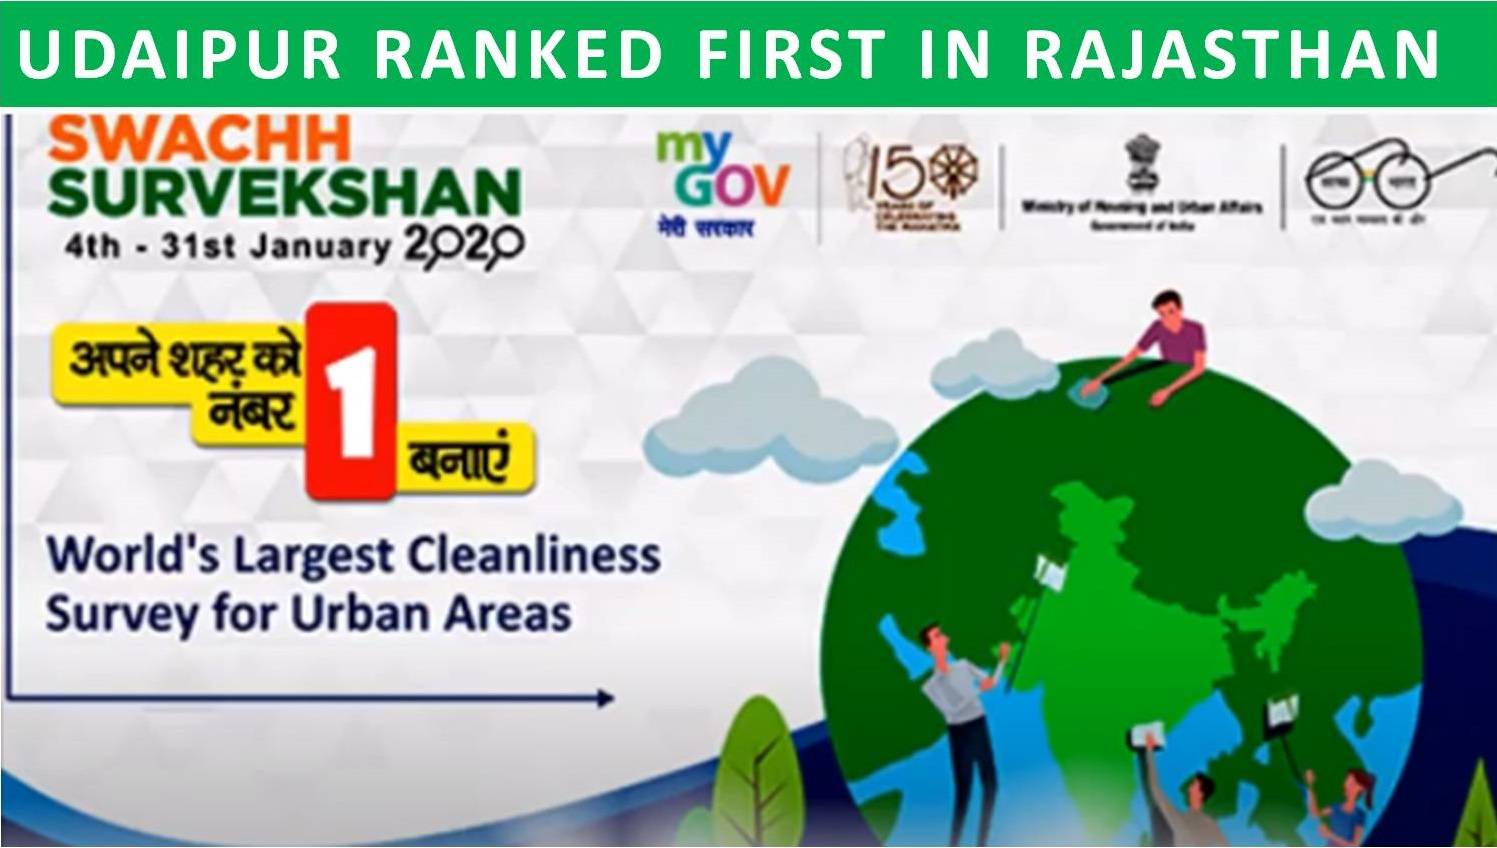 Udaipur ranked first in Rajasthan in Swachh Survekshan 2020 - #54 at national level